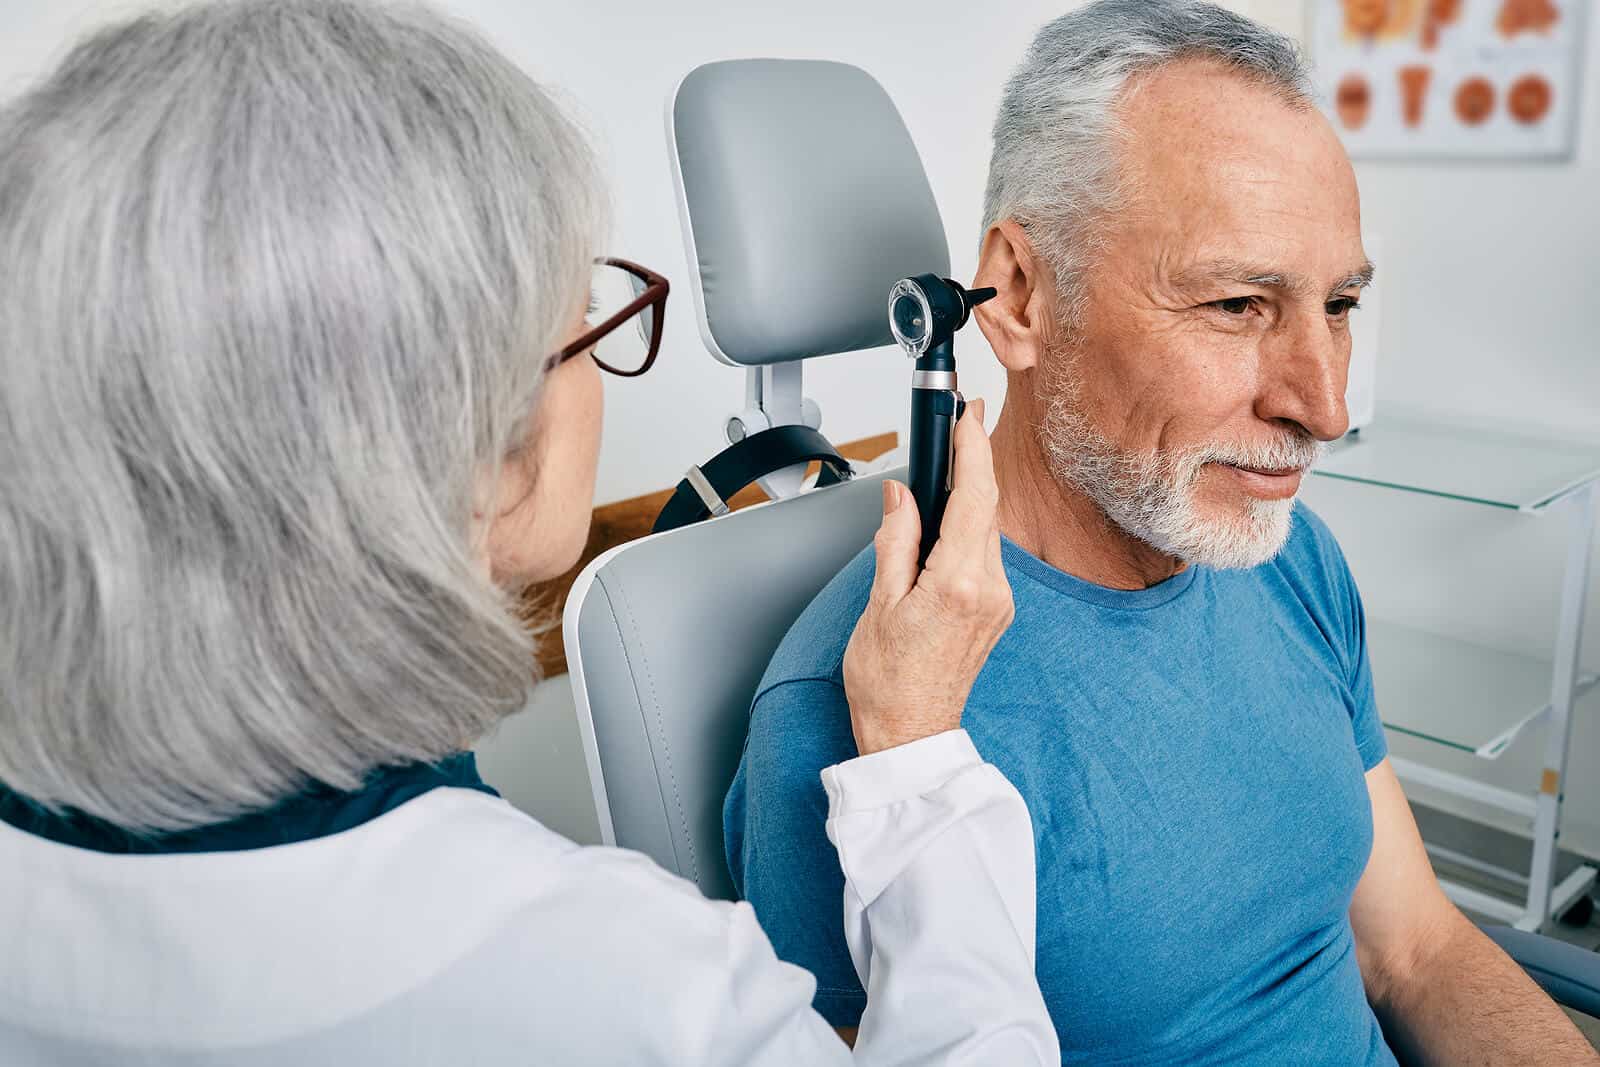 Featured image for “This November, Test Your Hearing in Honor of American Diabetes Month”